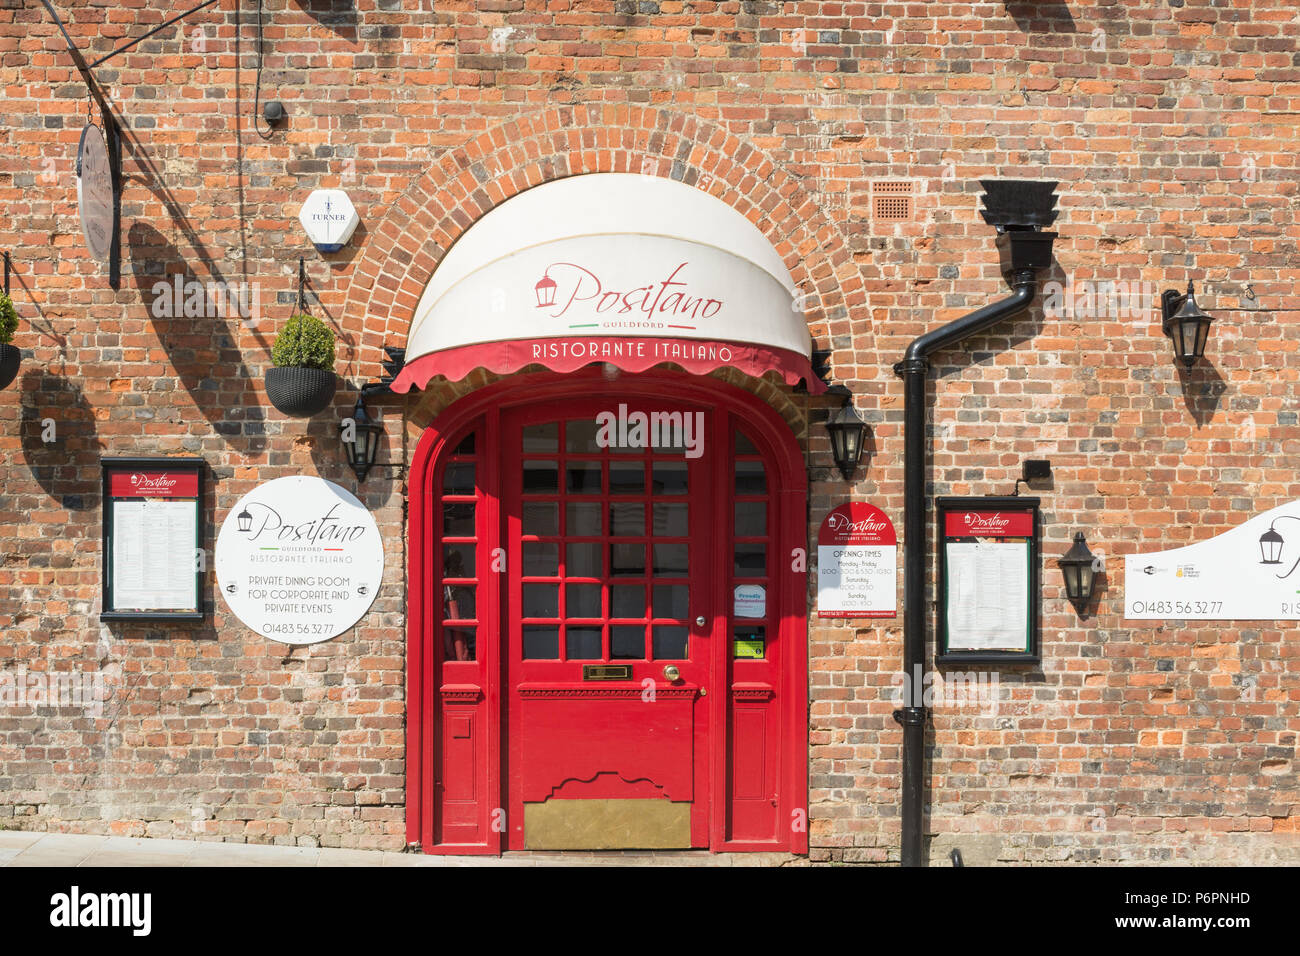 The Positano Italian restaurant in an Elizabethan building in Guildford town centre, Surrey, UK Stock Photo